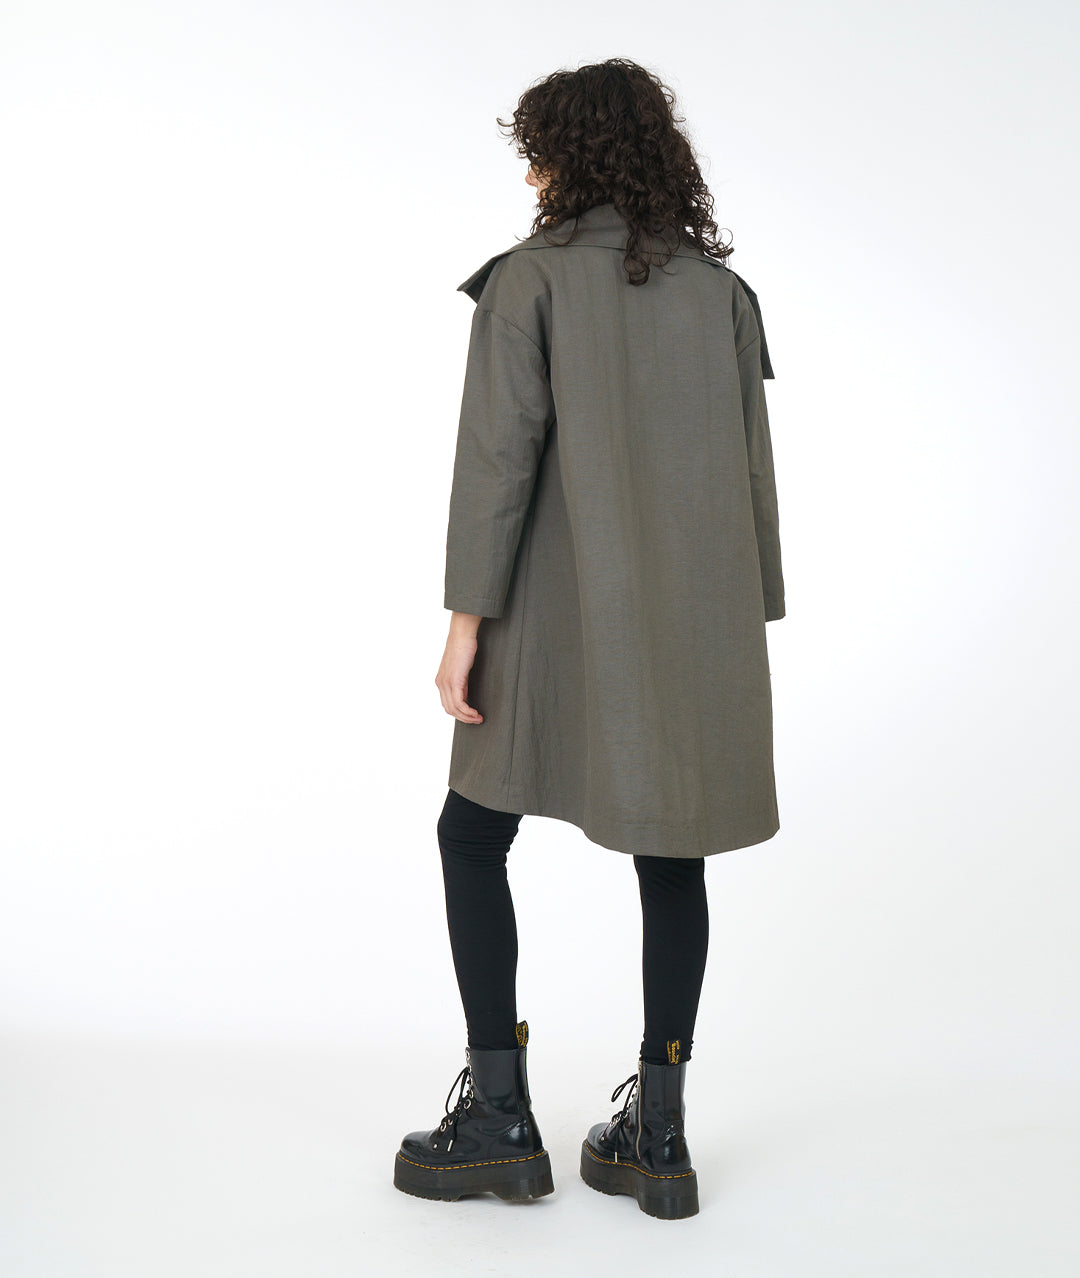 model in a black legging and top, worn with a grey jacket with an oversized collar and asymmetrical pocket detail